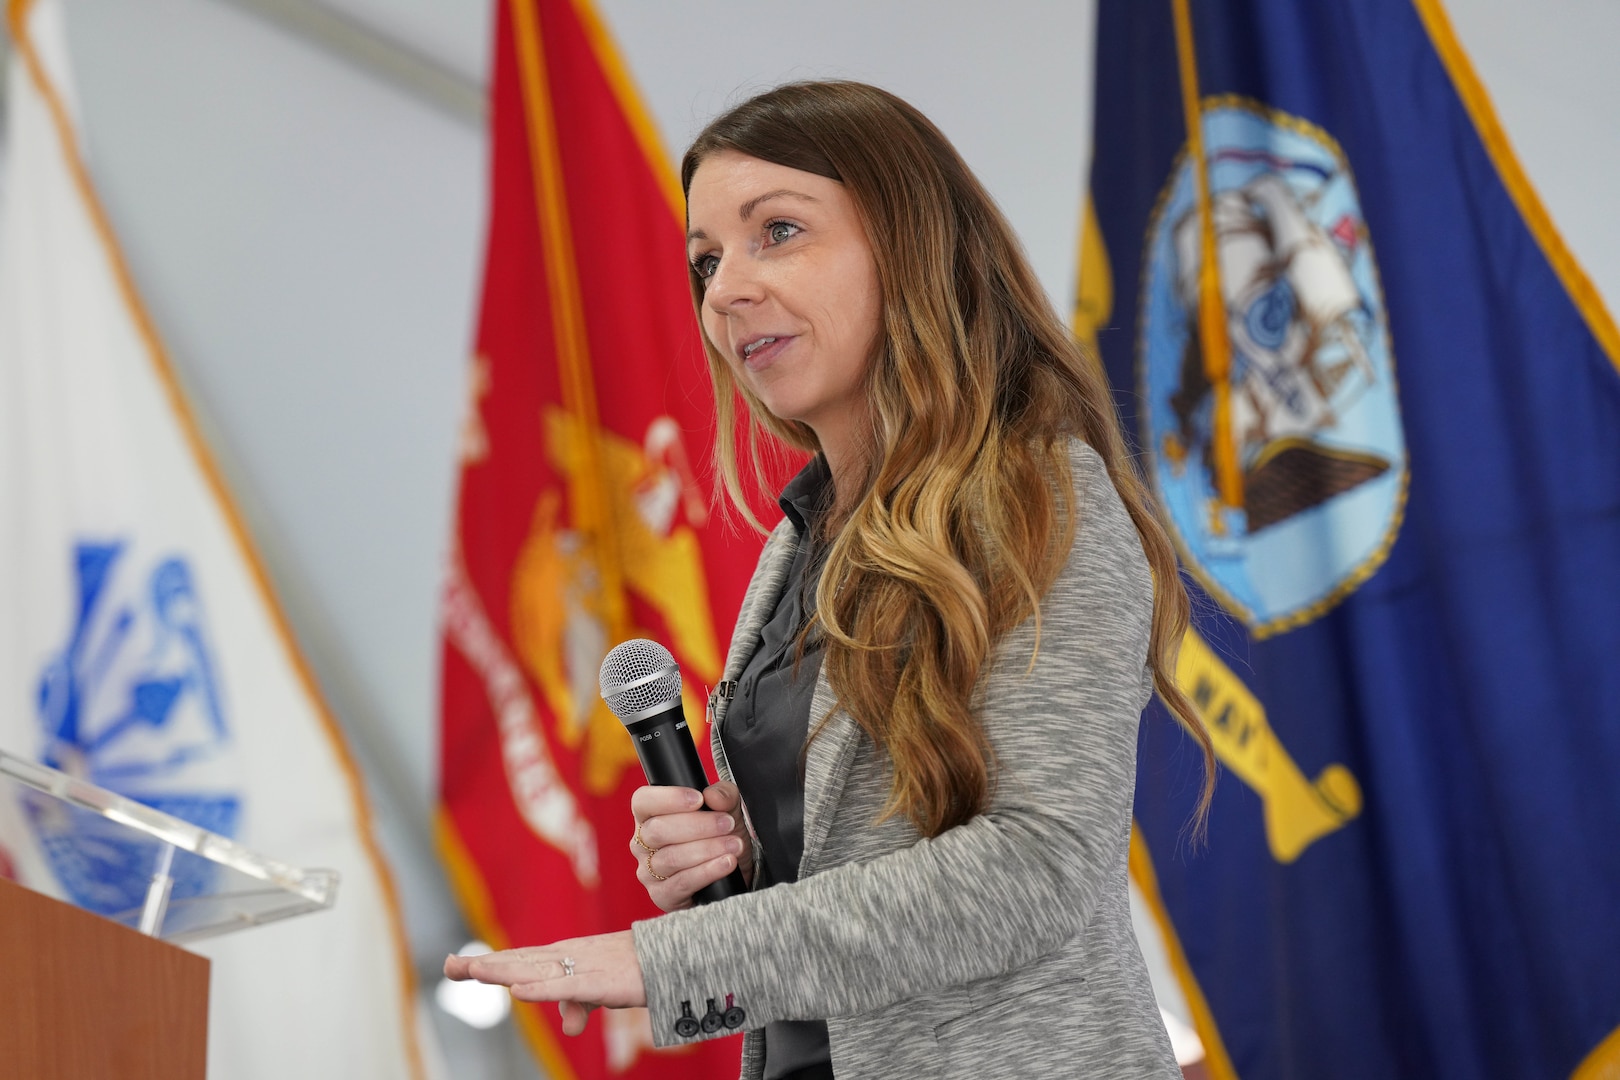 IMAGE: Brooke Bowler, the recruiting lead at Naval Surface Warfare Center Dahlgren Division, is recognized for receiving the Naval Sea Systems Command Human Resources Community MVP Award.